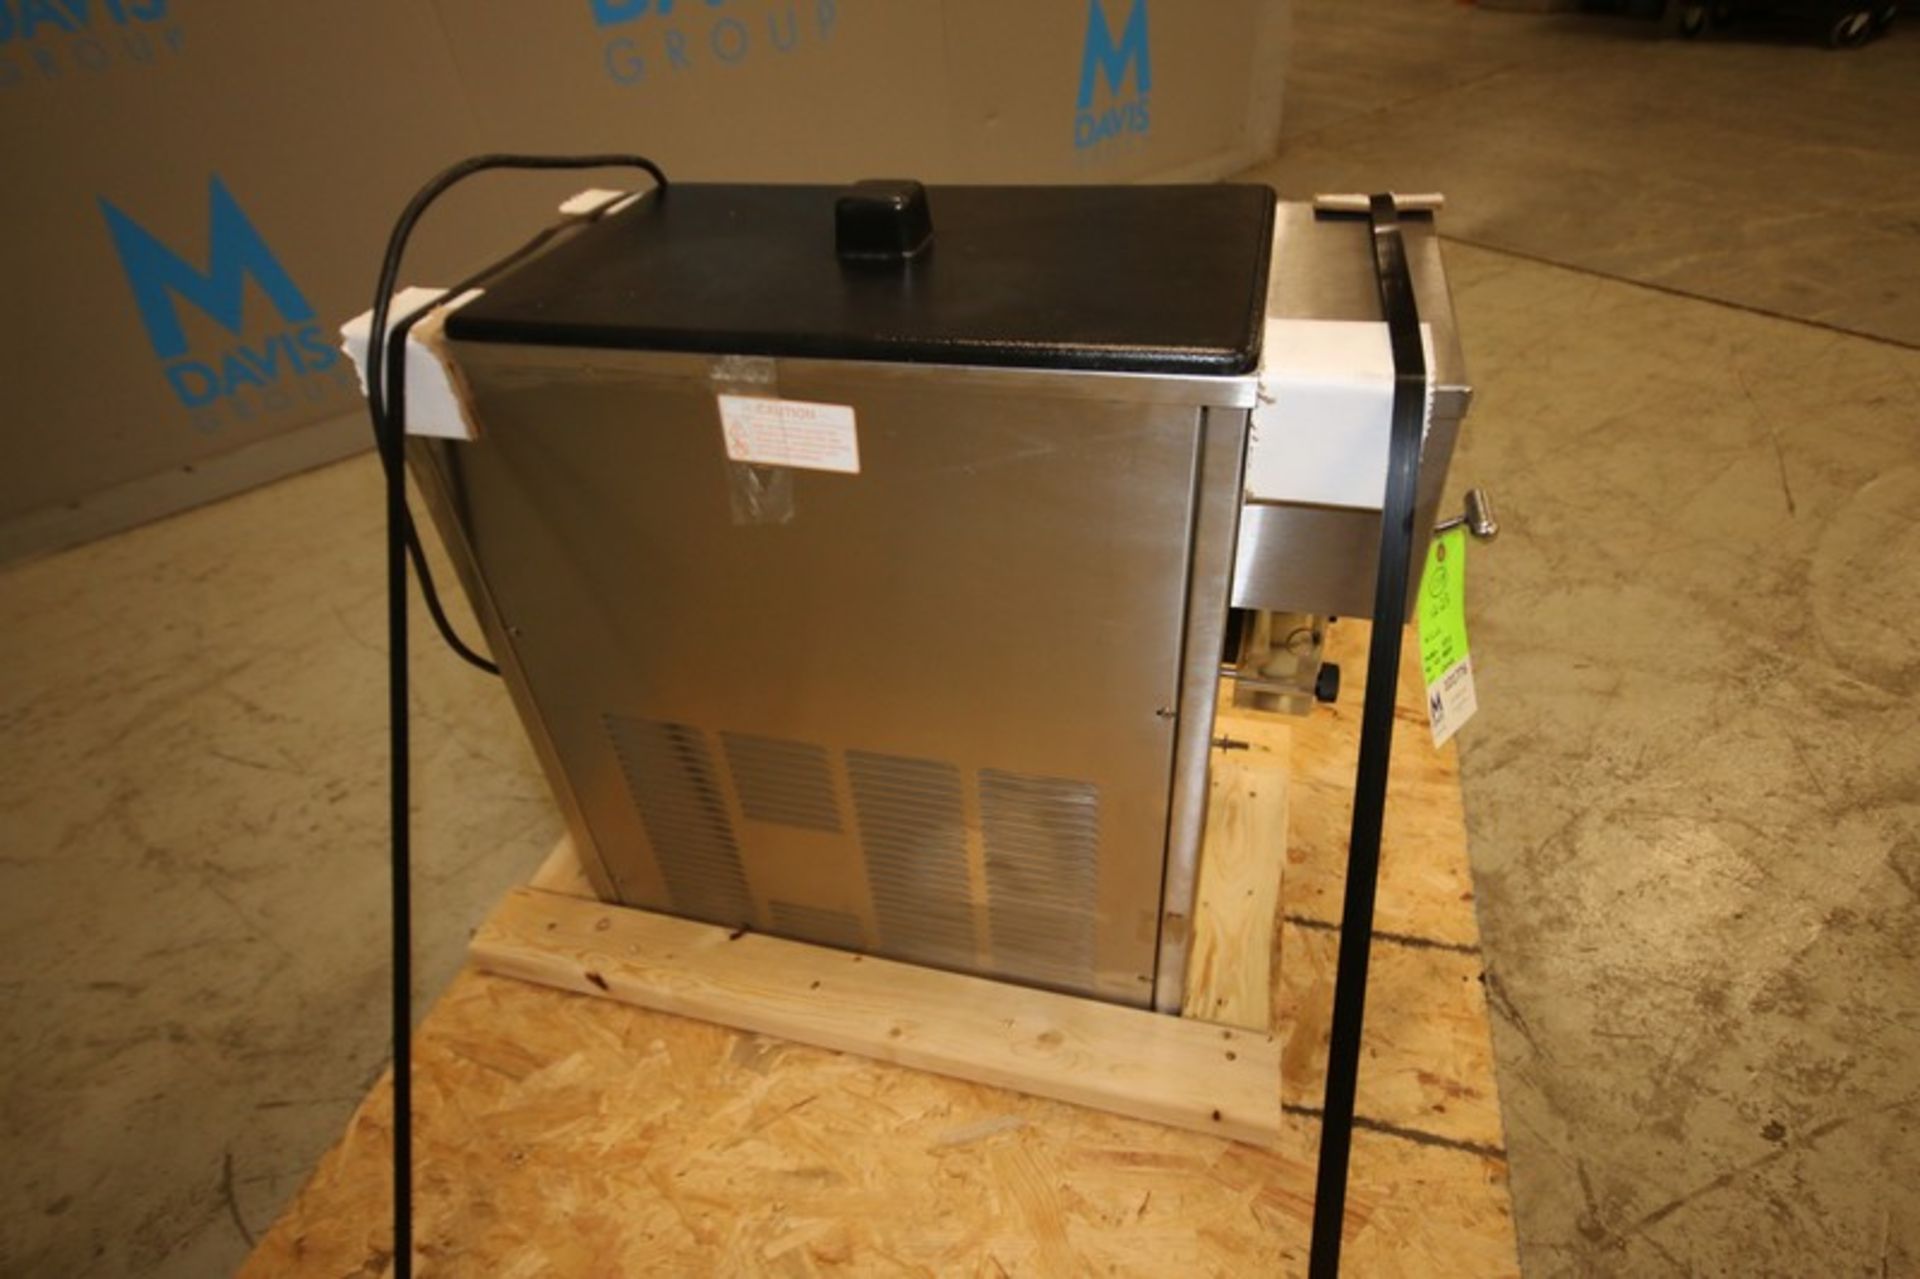 Wilch S/S Barrel Freezer, Model 3311, SN KG 8889, R404A Refrigerant, 115V (INV#101776) (Located @ - Image 4 of 8